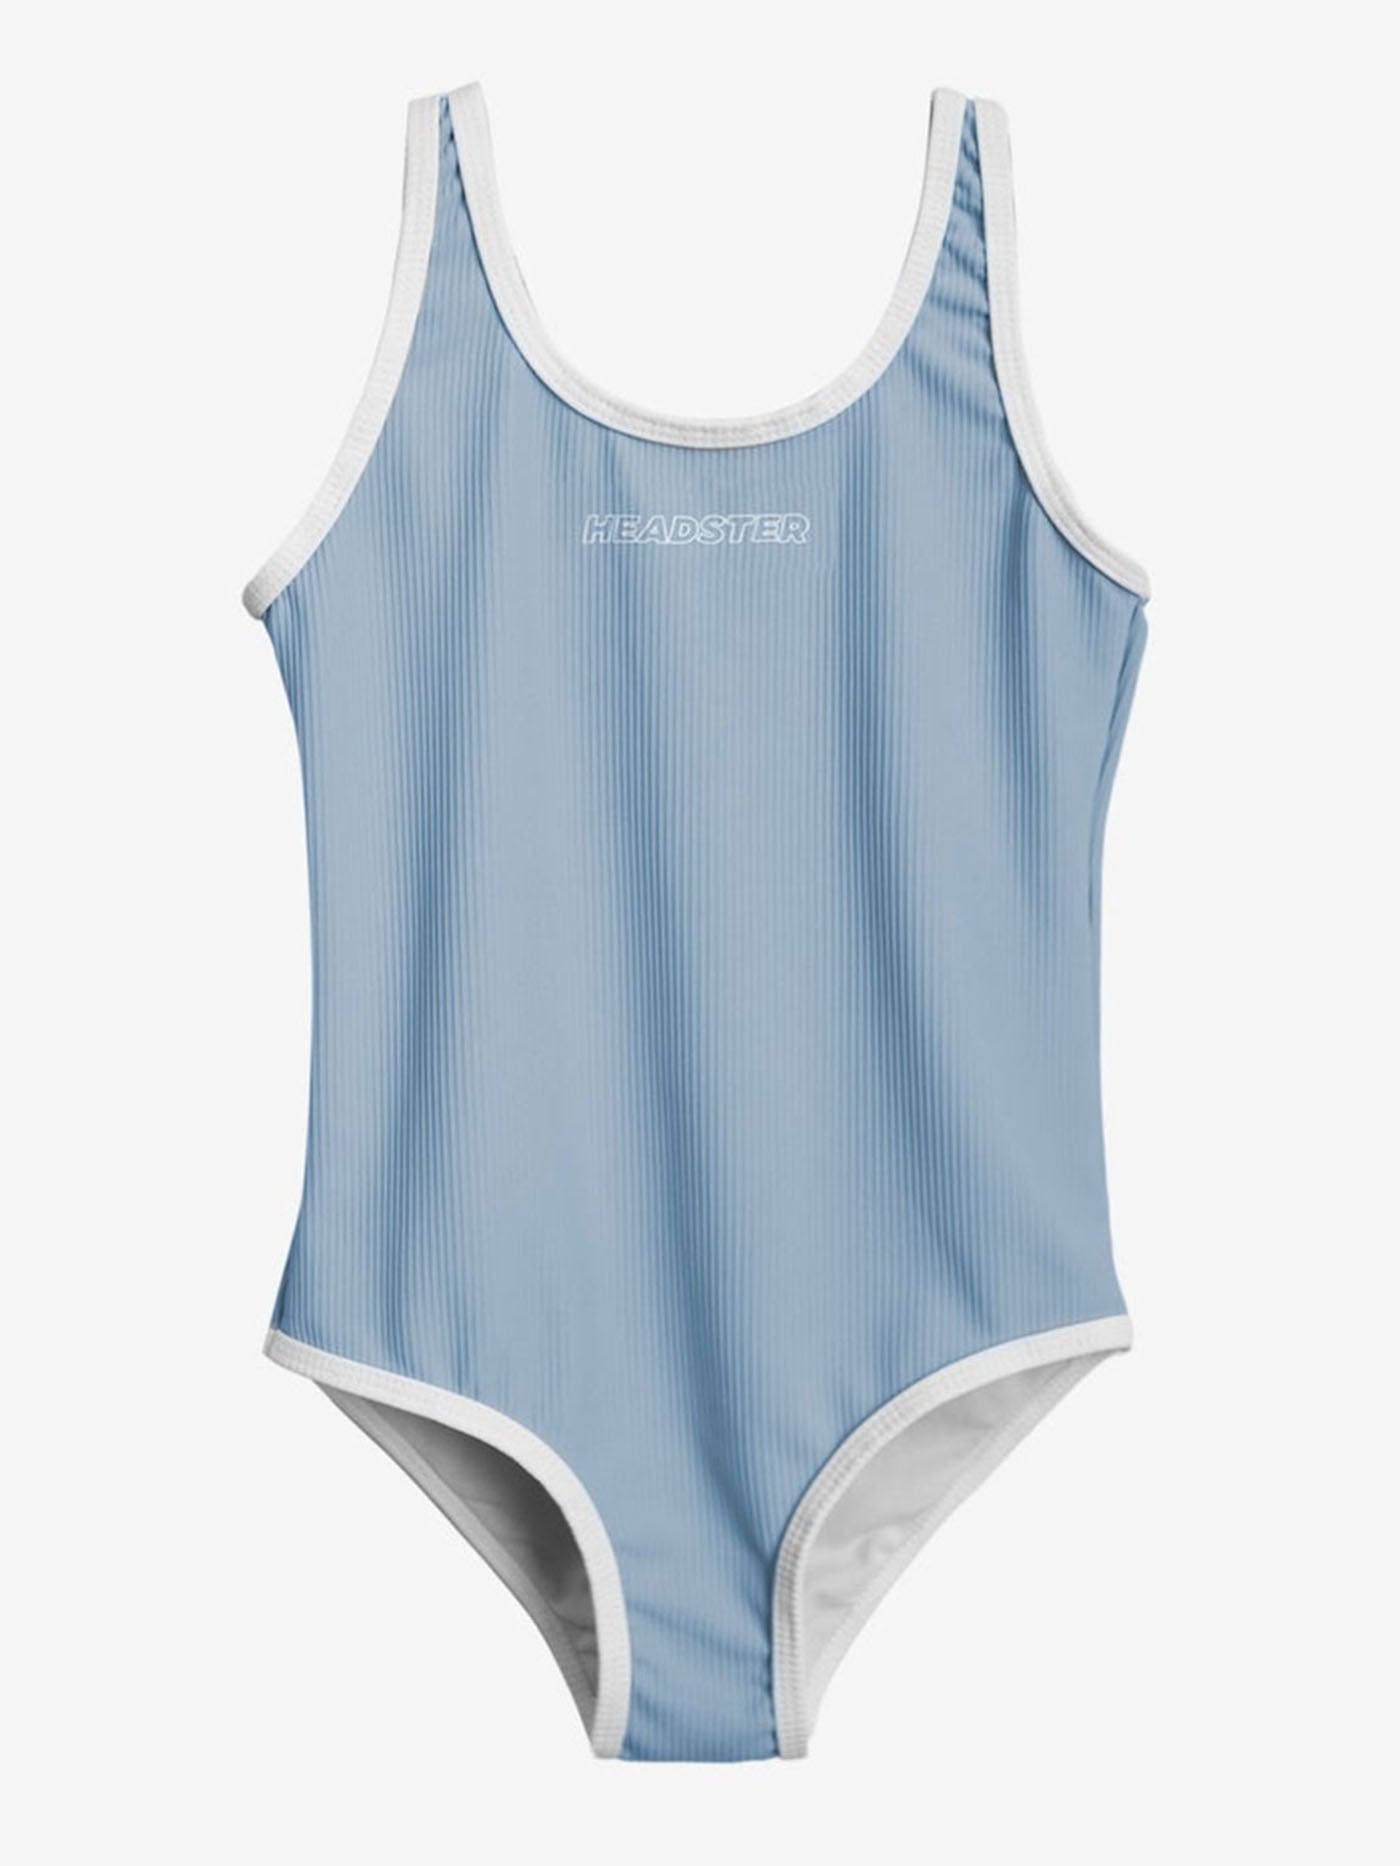 Headster Seaside One Piece Swimsuit Spring 2024